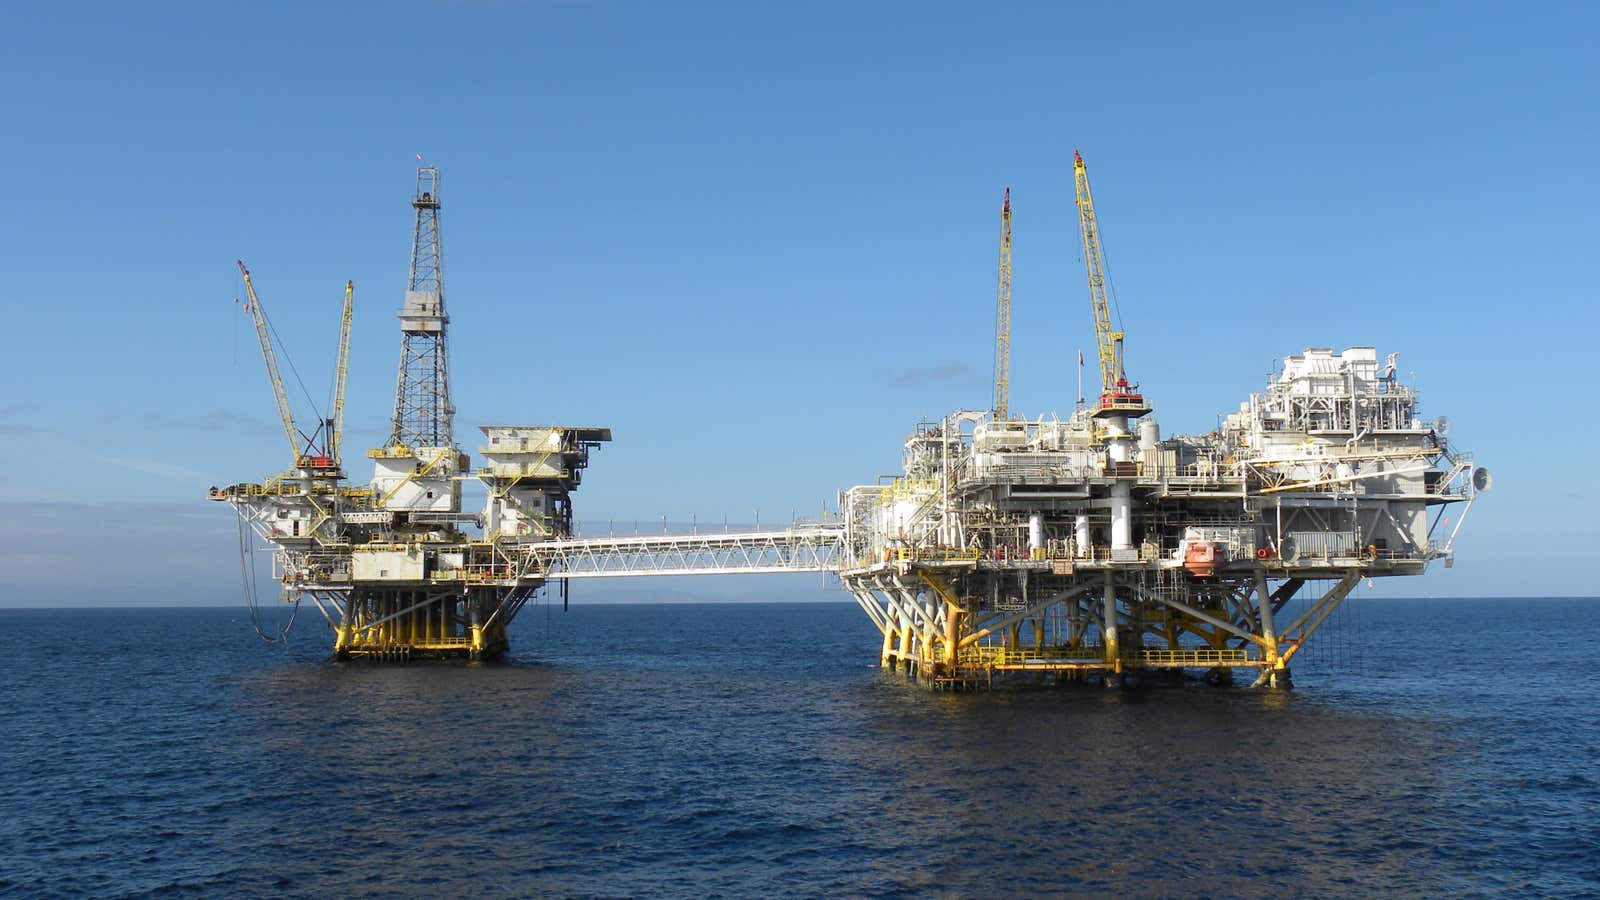 Offshore oil platforms are becoming a rarer sight.